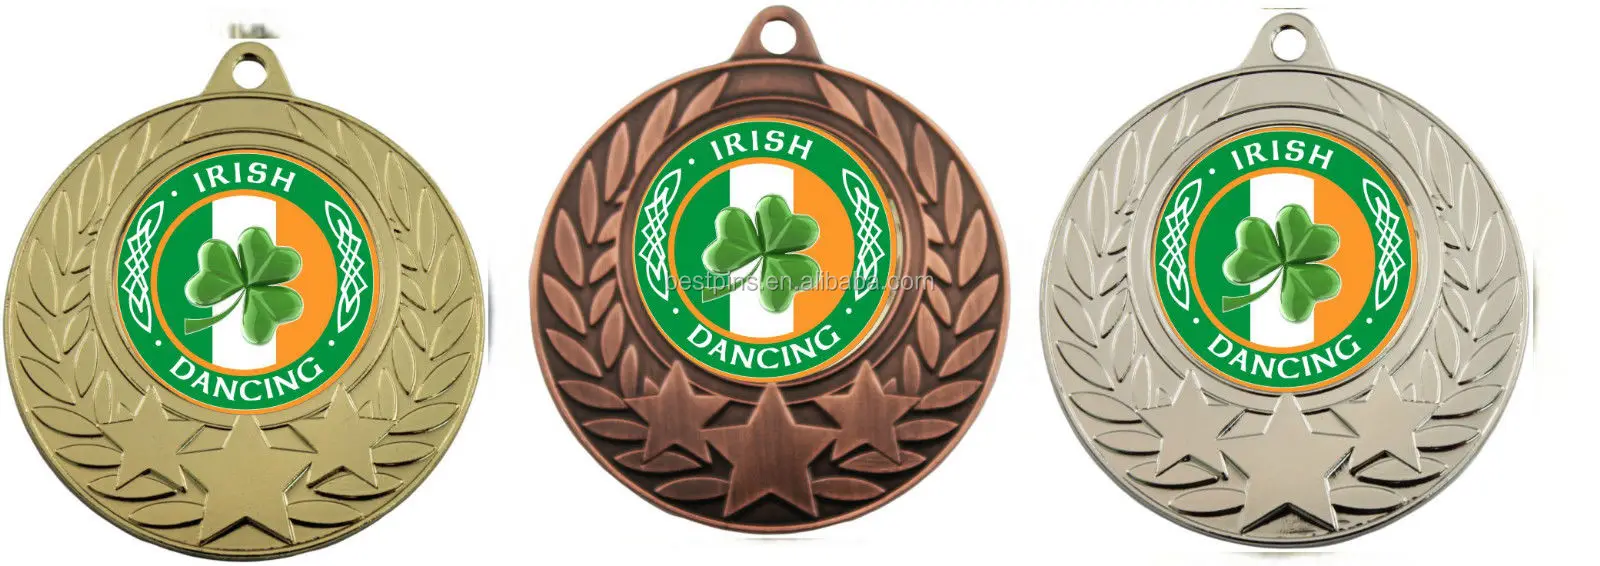 STREET DANCE DANCING GOLD SILVER OR BRONZE 50mm MEDAL FREE RIBBON AM1015R.01 MB3 